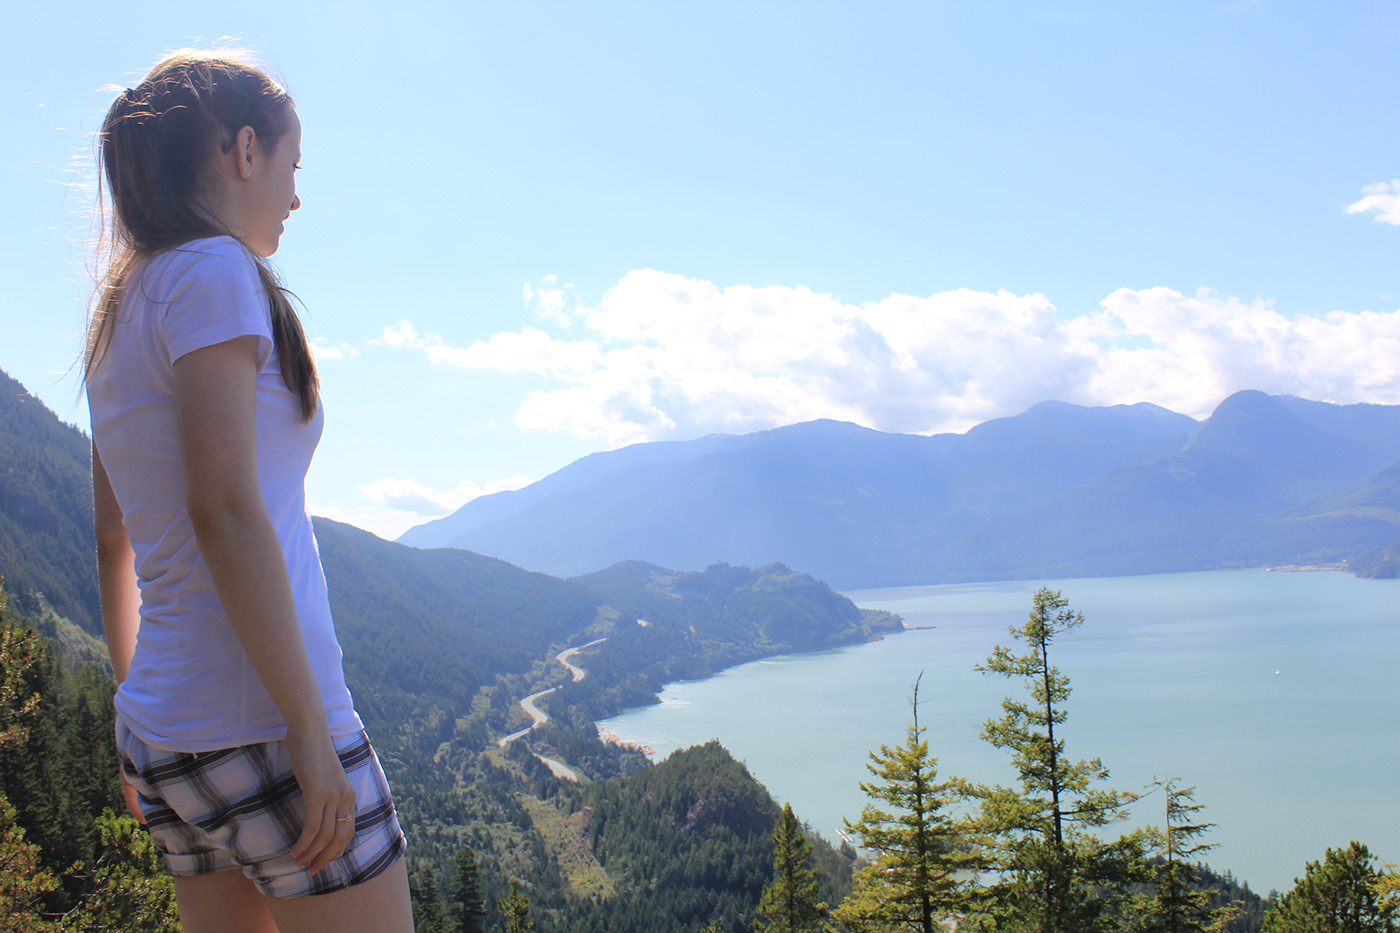 Patricia Celan admiring the view of mountains, water, and trees, from a Shannon Falls hike lookout.